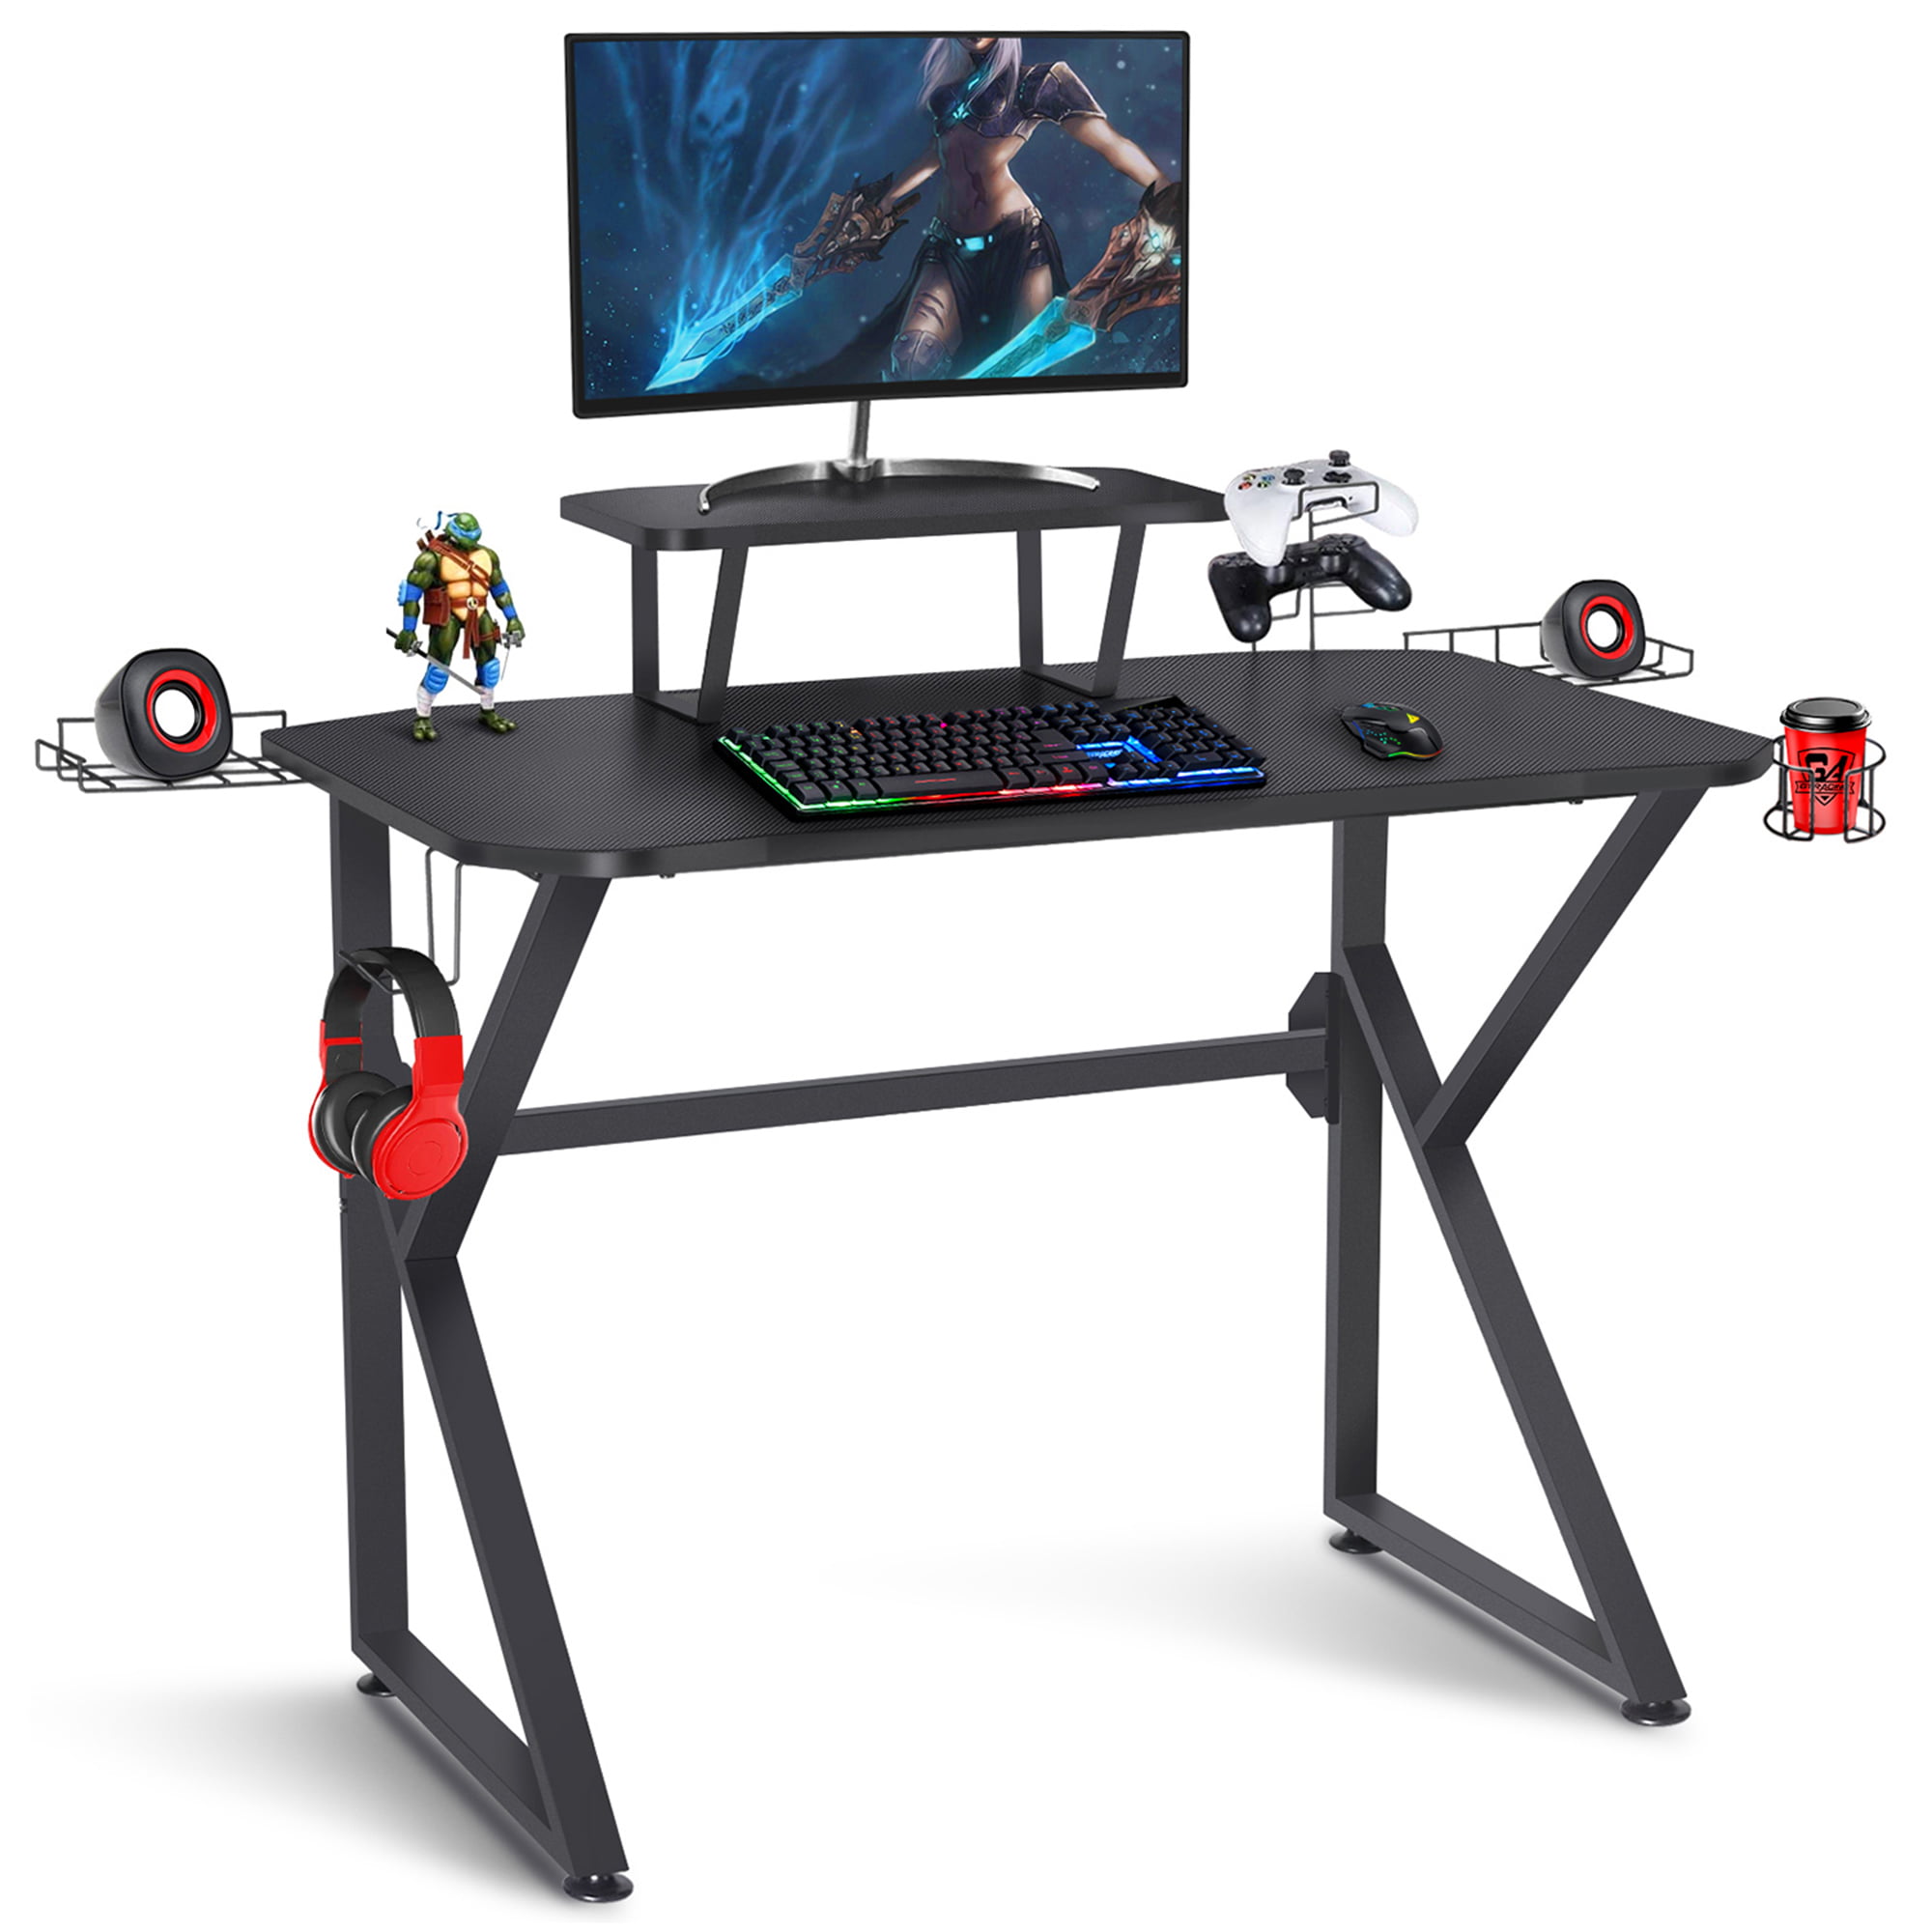 GTRACING Gaming Desk,Computer Desk with Storage,Ergonomic Z-Shaped Gaming Table 